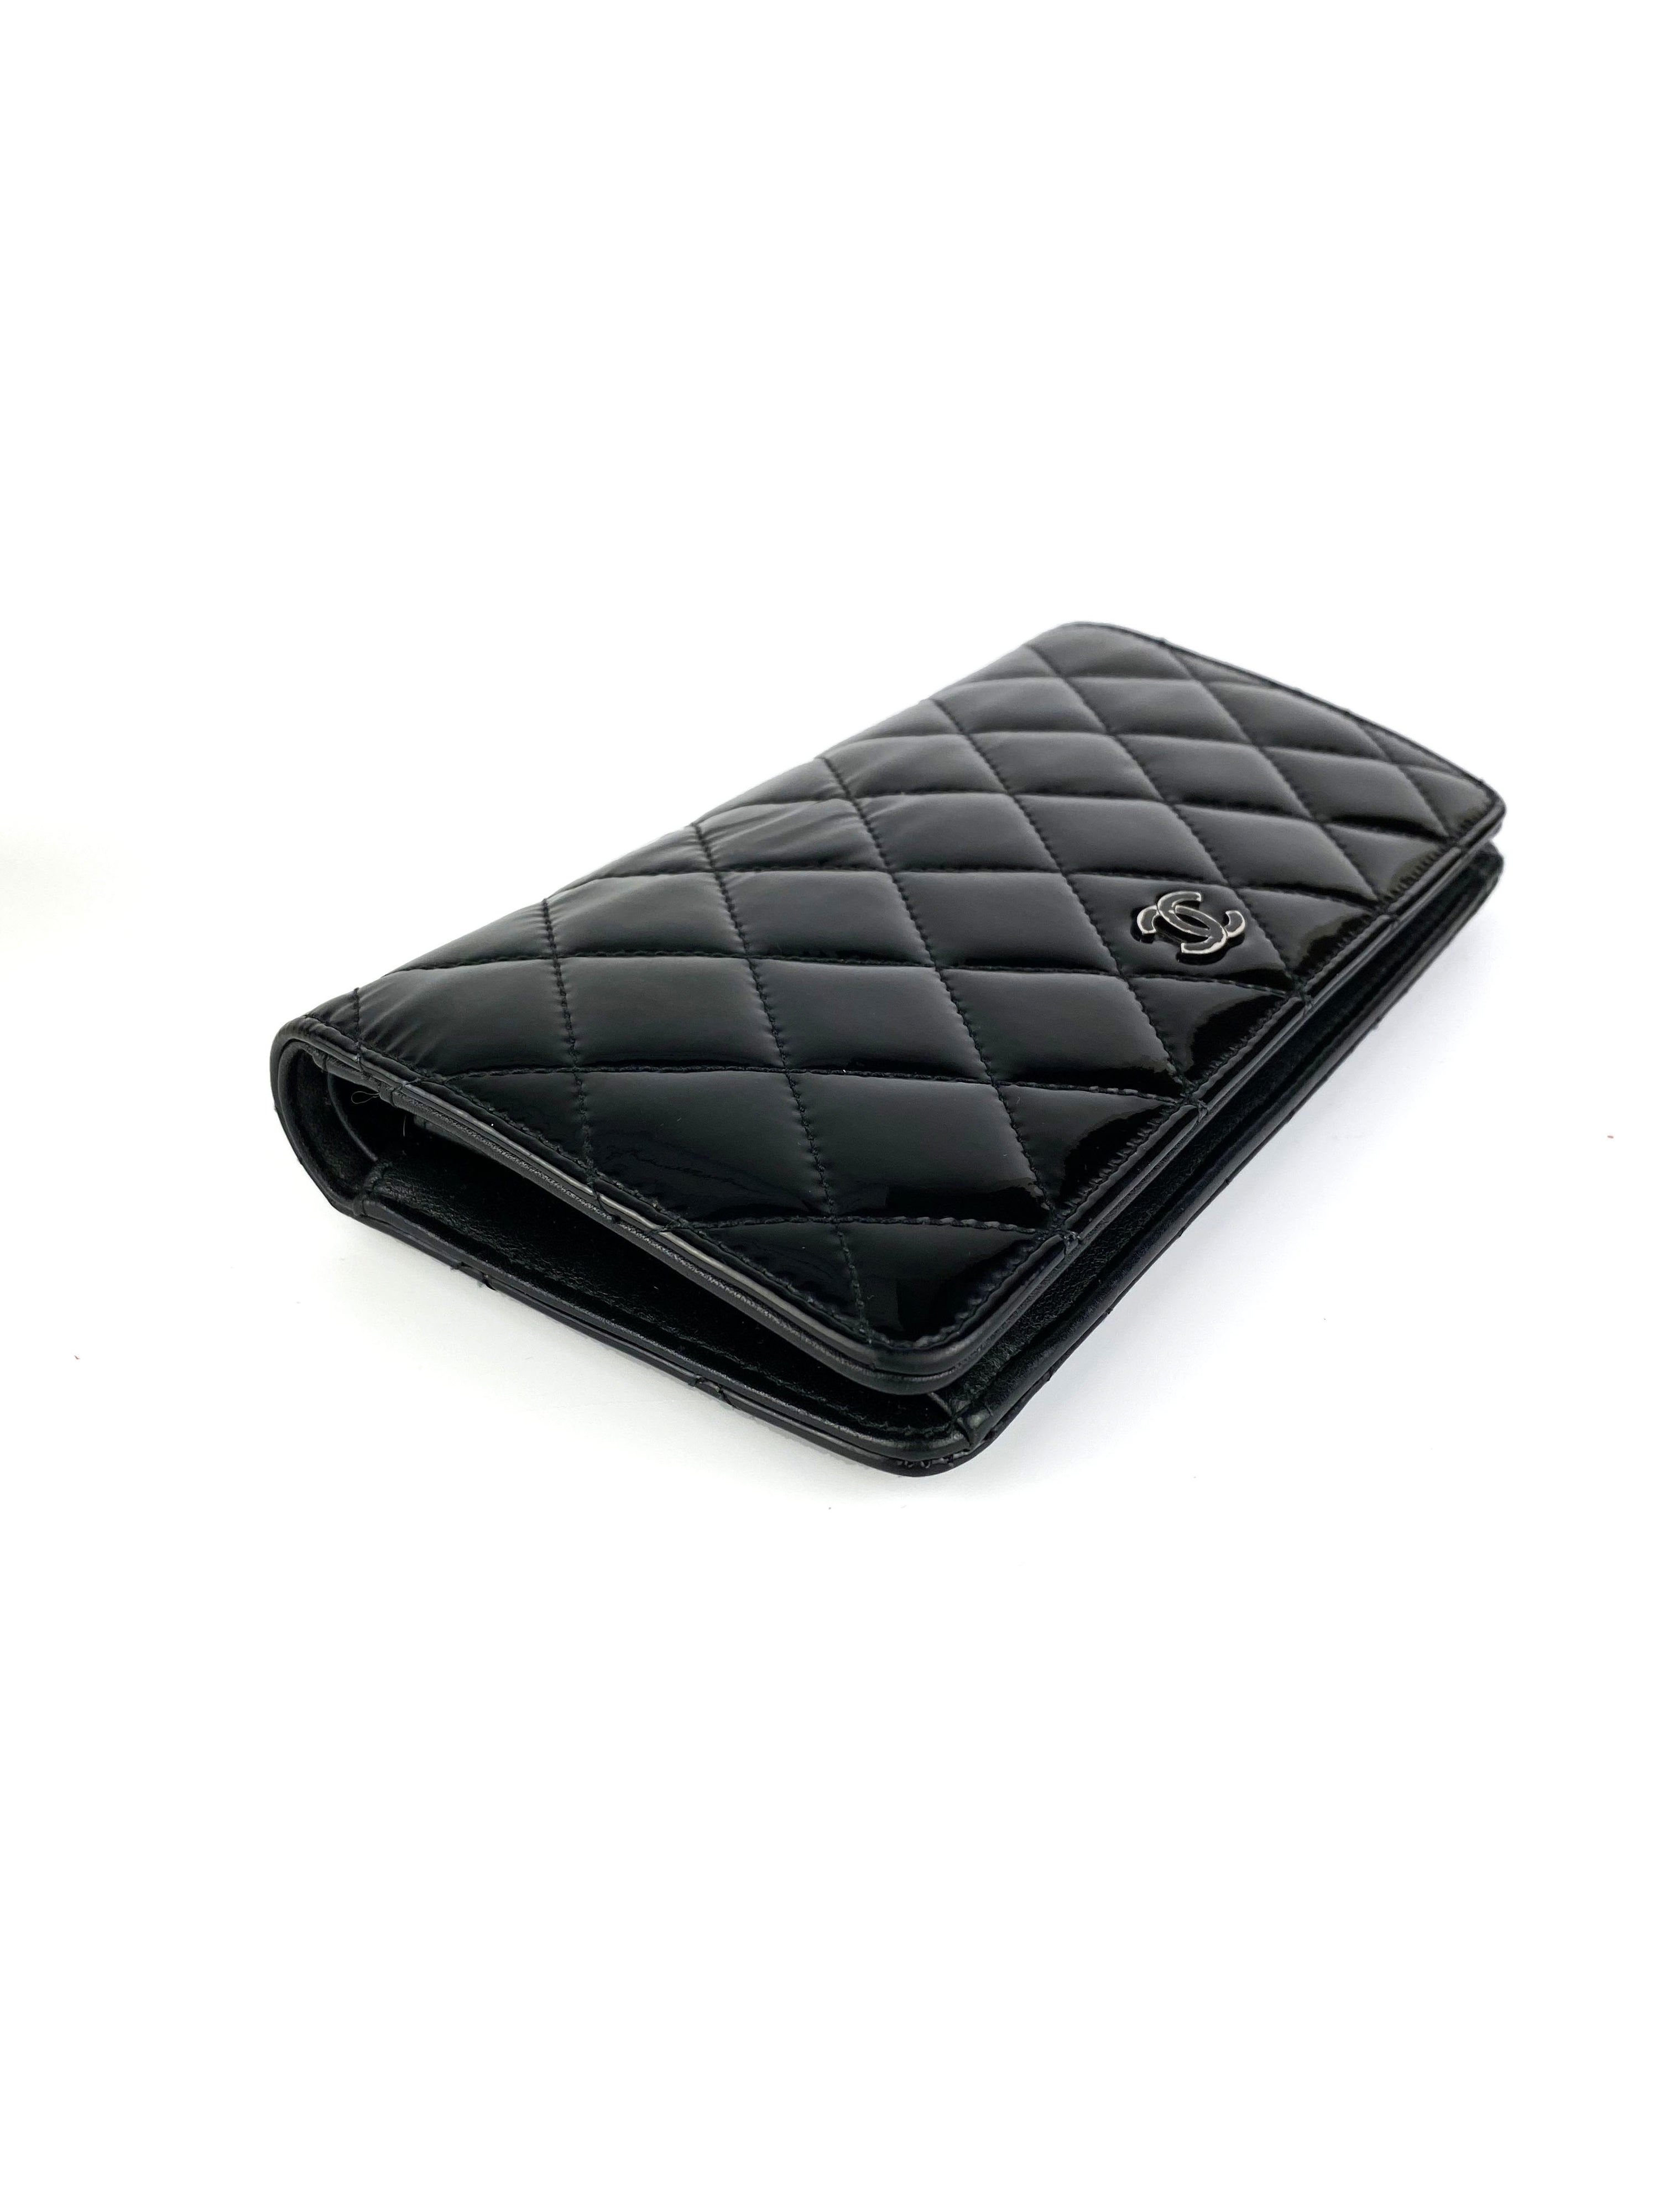 Chanel Black Patent Leather Wallet